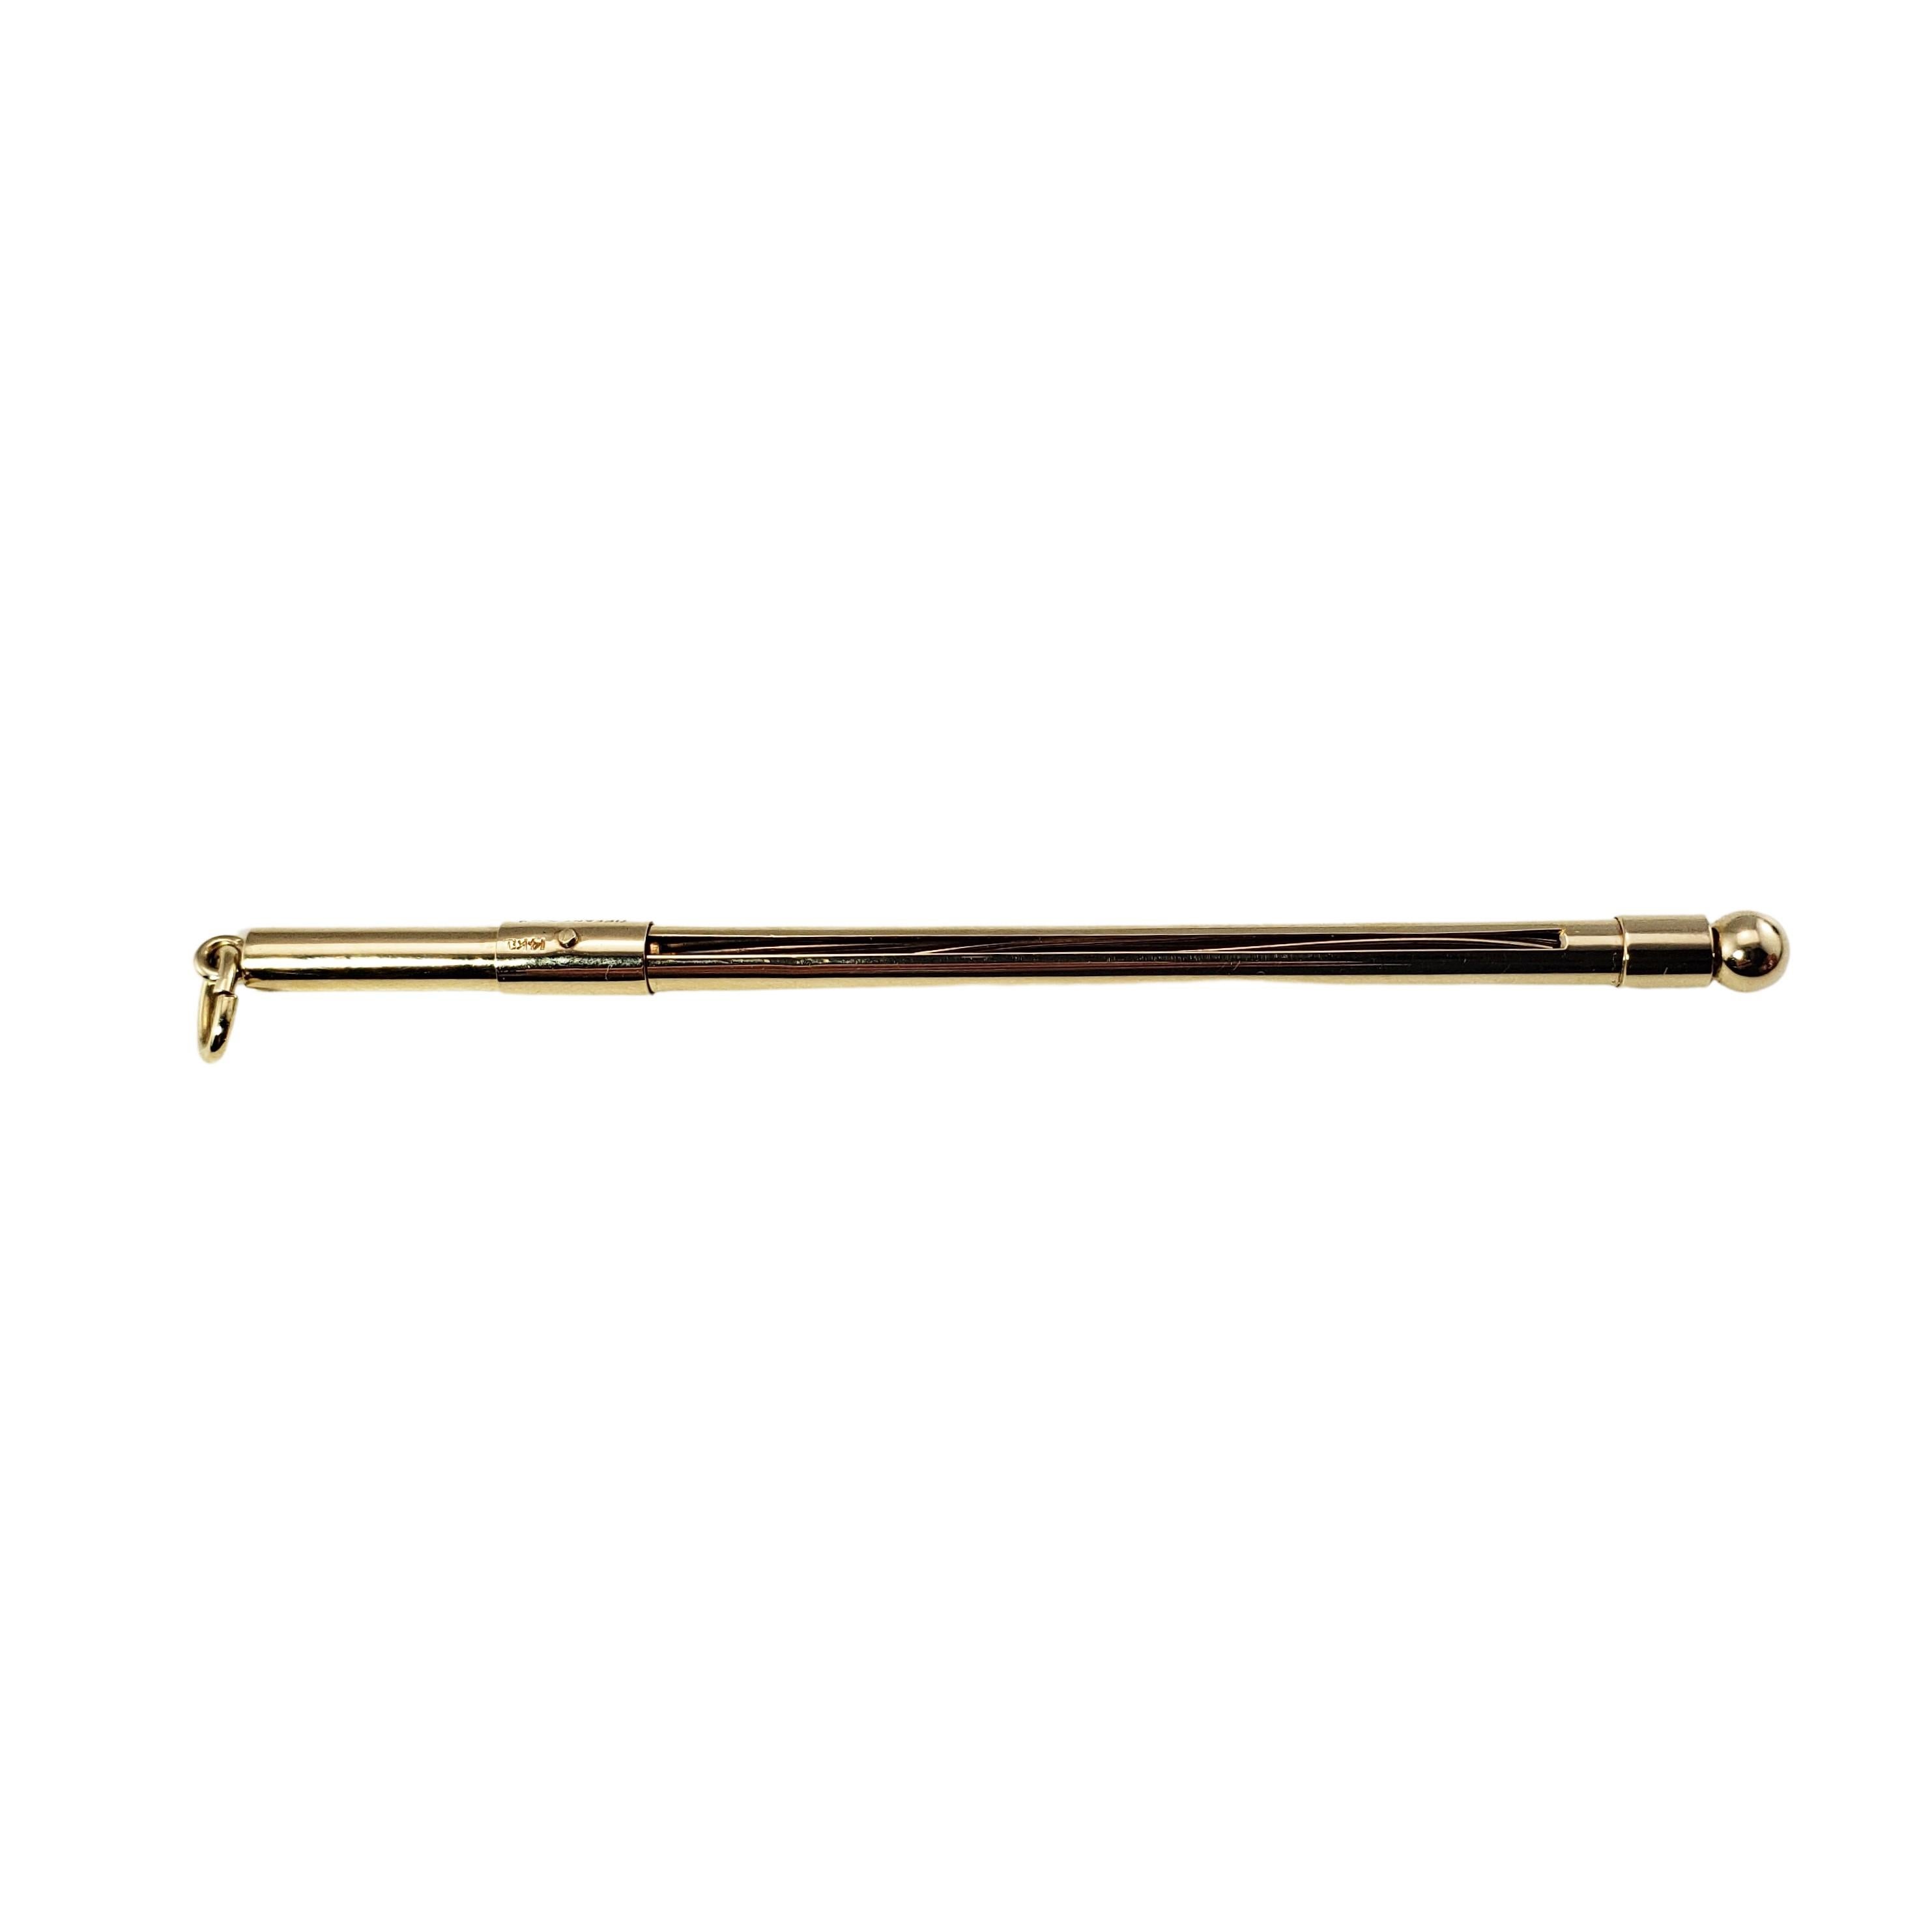 Tiffany & Co. 14 Karat Yellow Gold Swizzle Stick-

Take your cocktails to the next level!

This elegant swizzle stick by Tiffany & Co. is crafted in beautifully detailed 14K yellow gold.

Size: 3.75 inches X 5 MM

Weight:  4.5 dwt. /  7.1